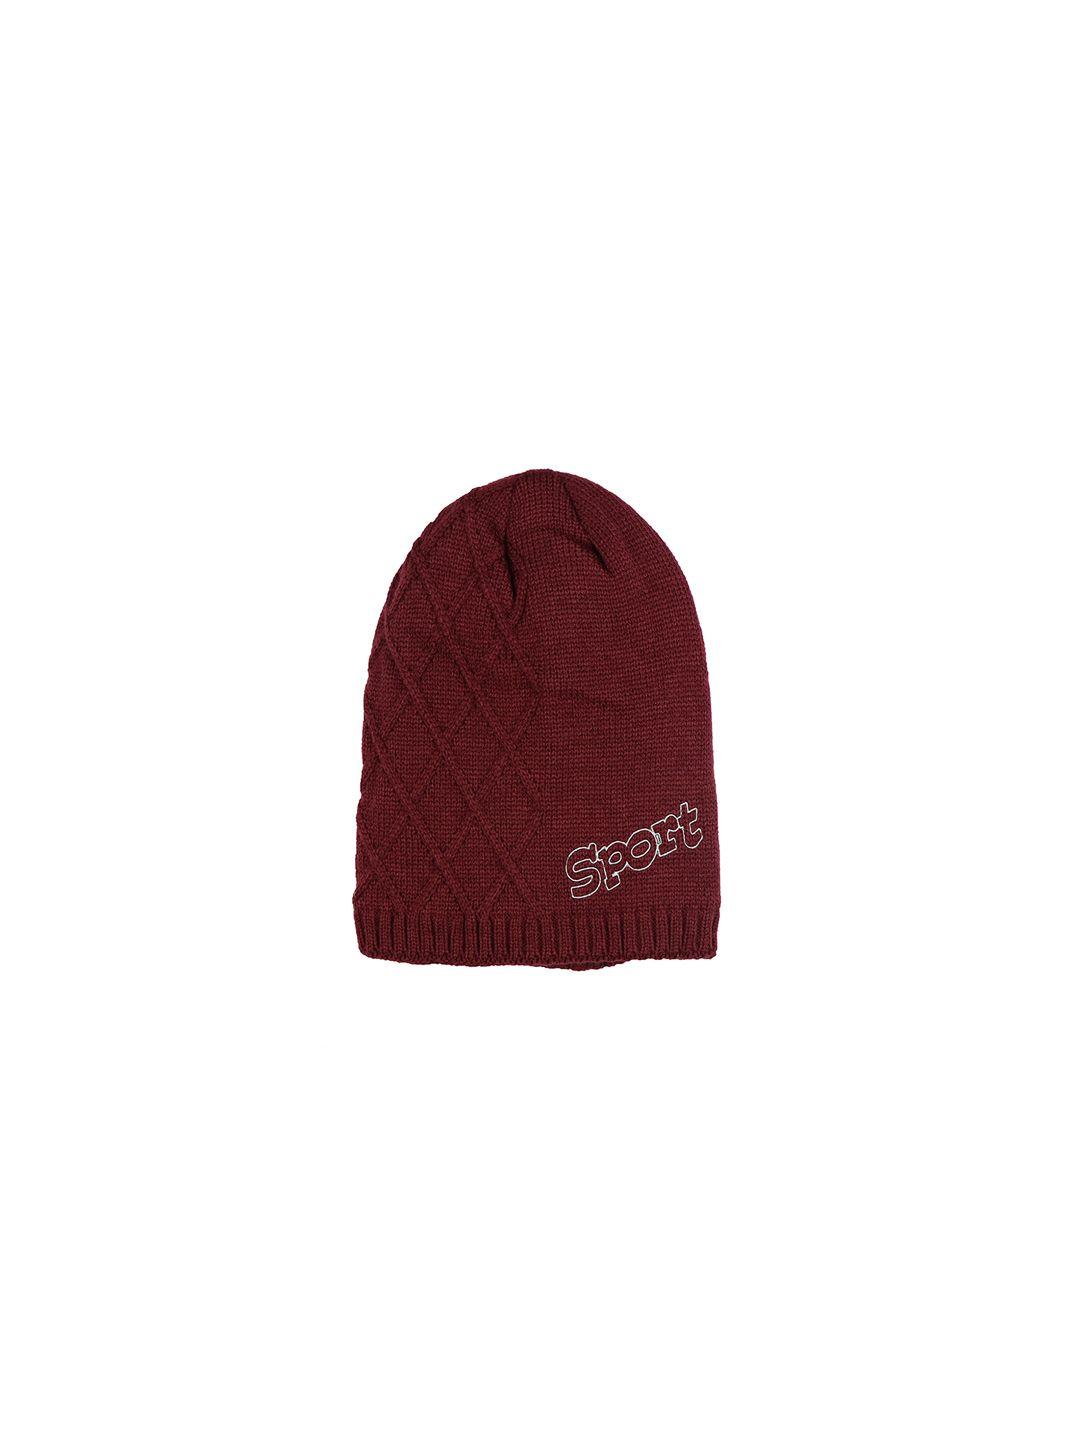 isweven unisex maroon solid beanie